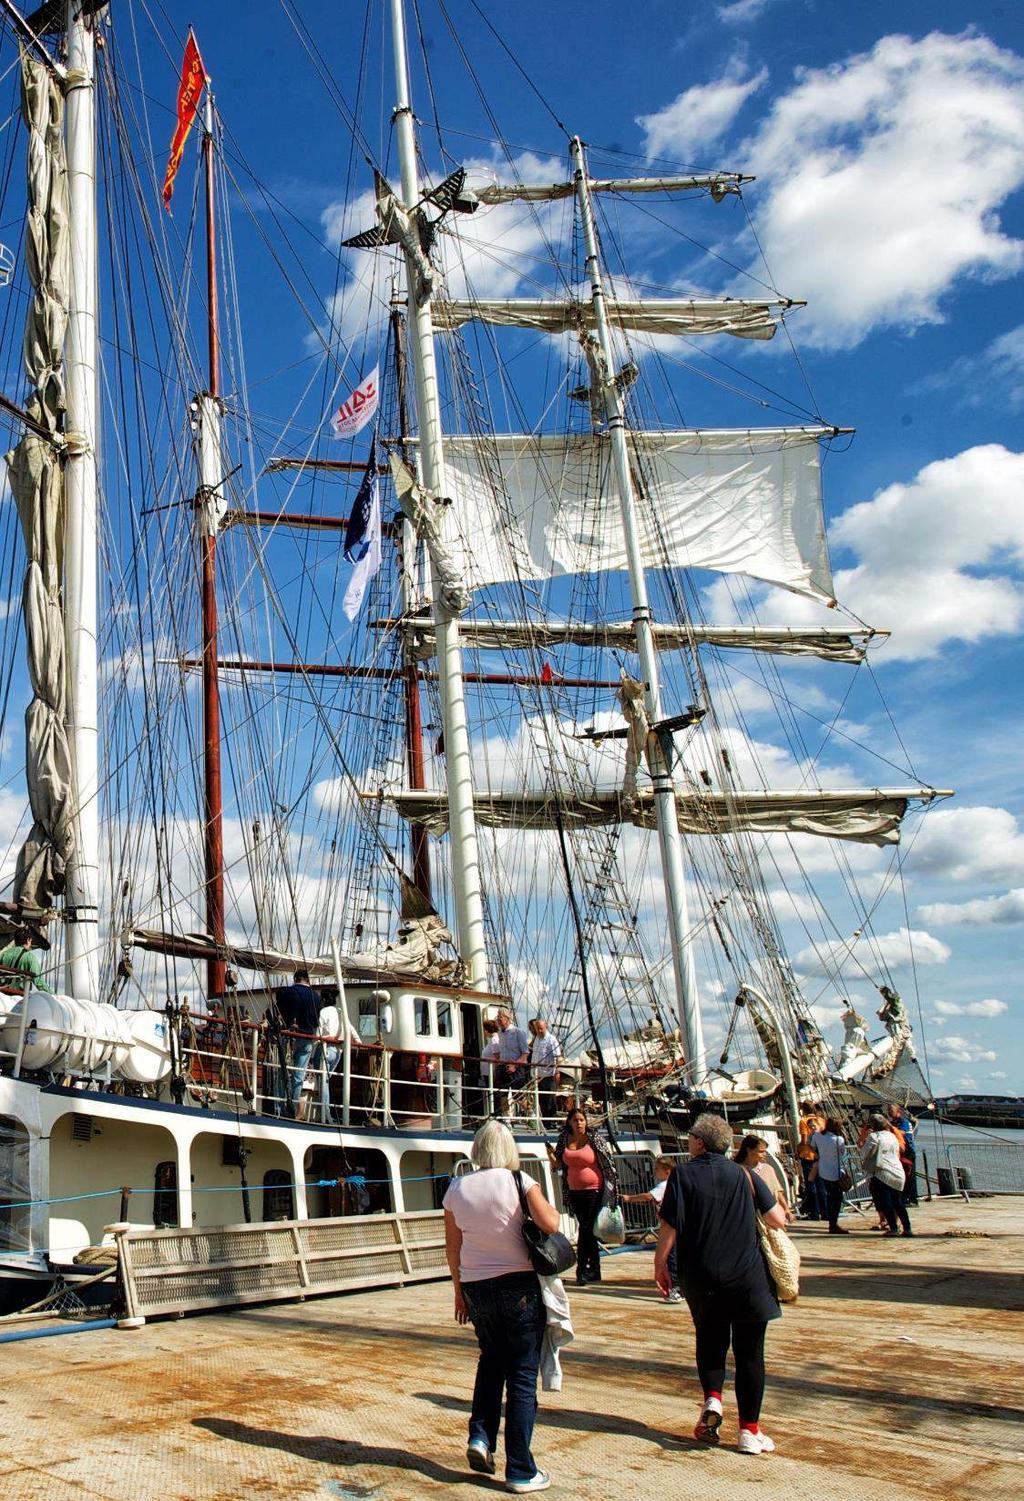 Visits to Moored Tall Ships Greenwich Boat shuttles from Greenwich to visit a Tall Ship Depart every 15 mins 1 hr visit including tour and opportunity to chat with crew Around 8 per person / 20